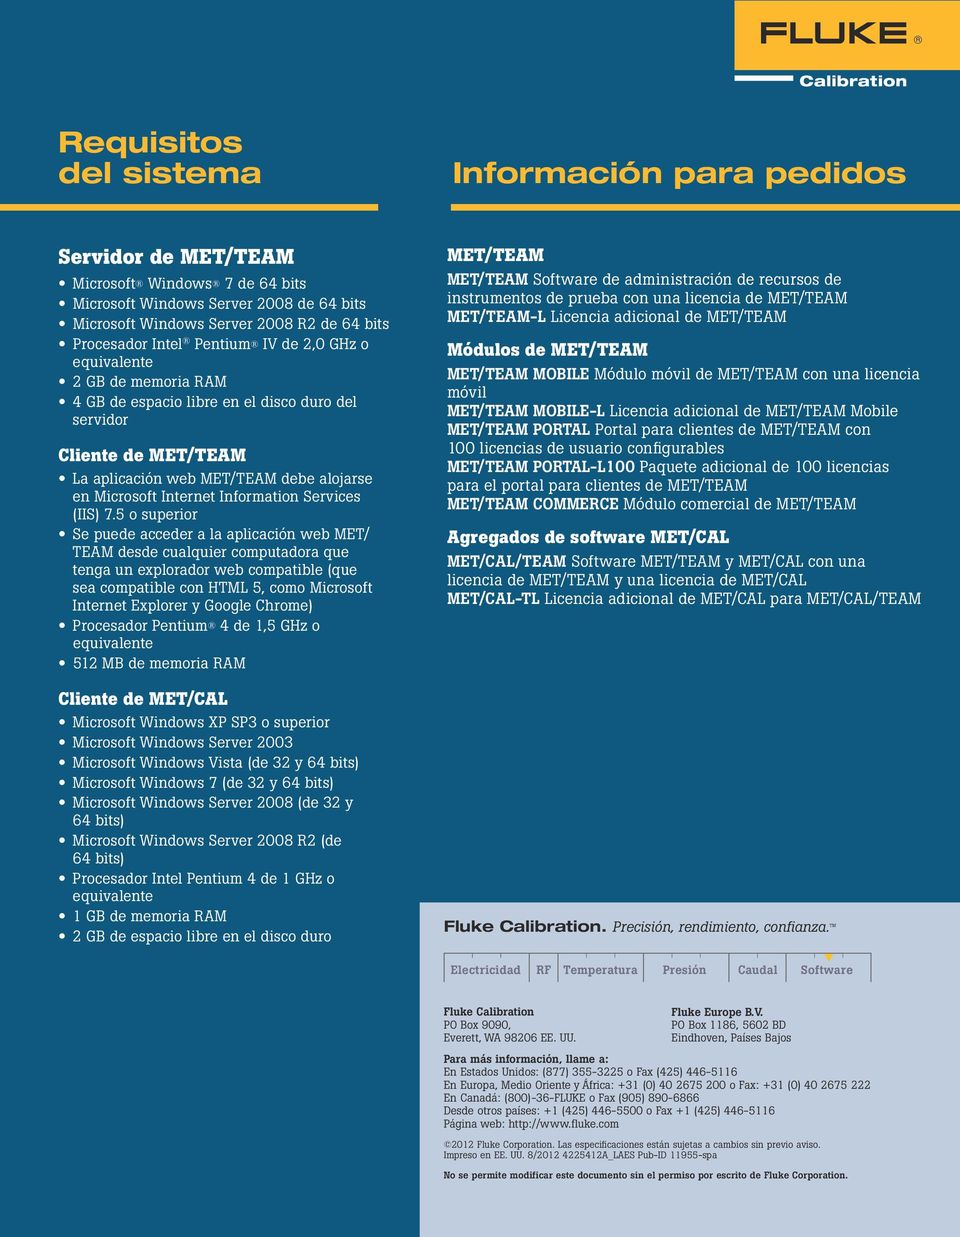 Information Services (IIS) 7.